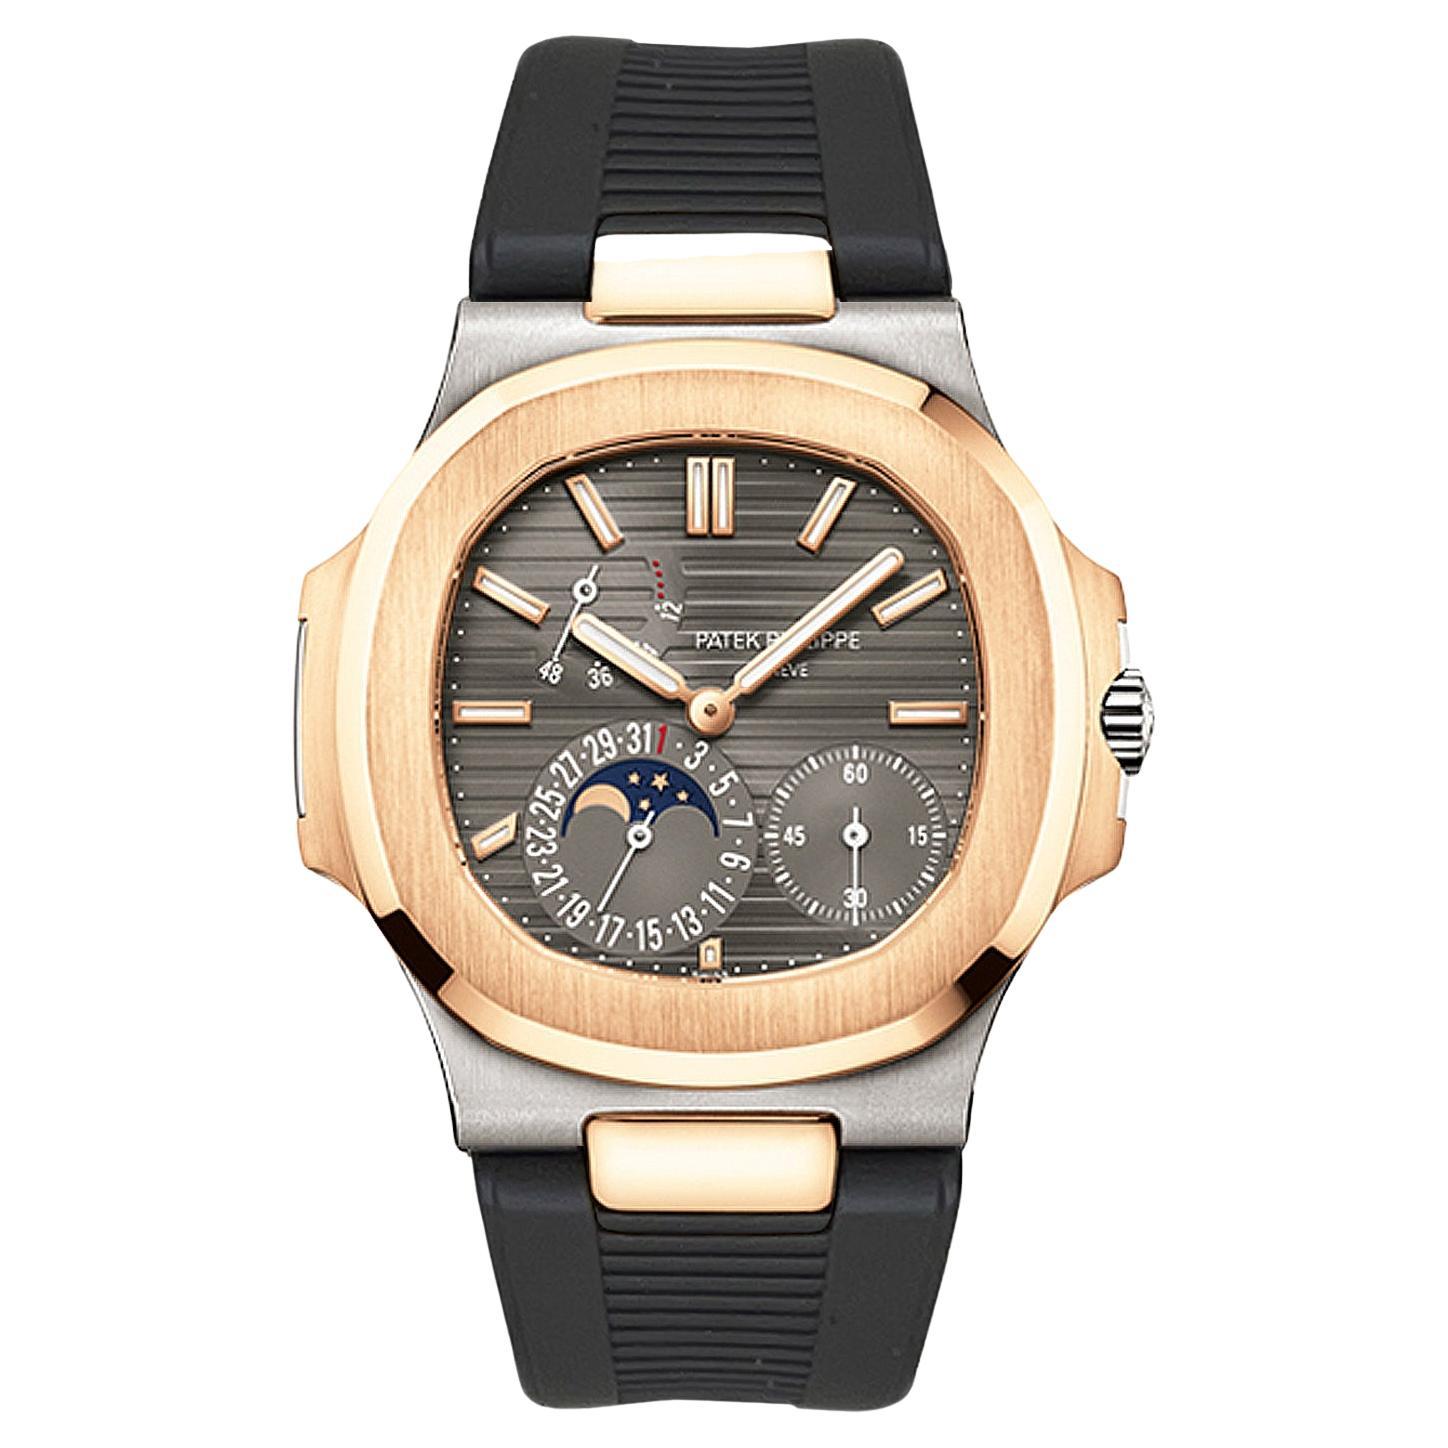 How do I find a Patek Philippe watch serial number?